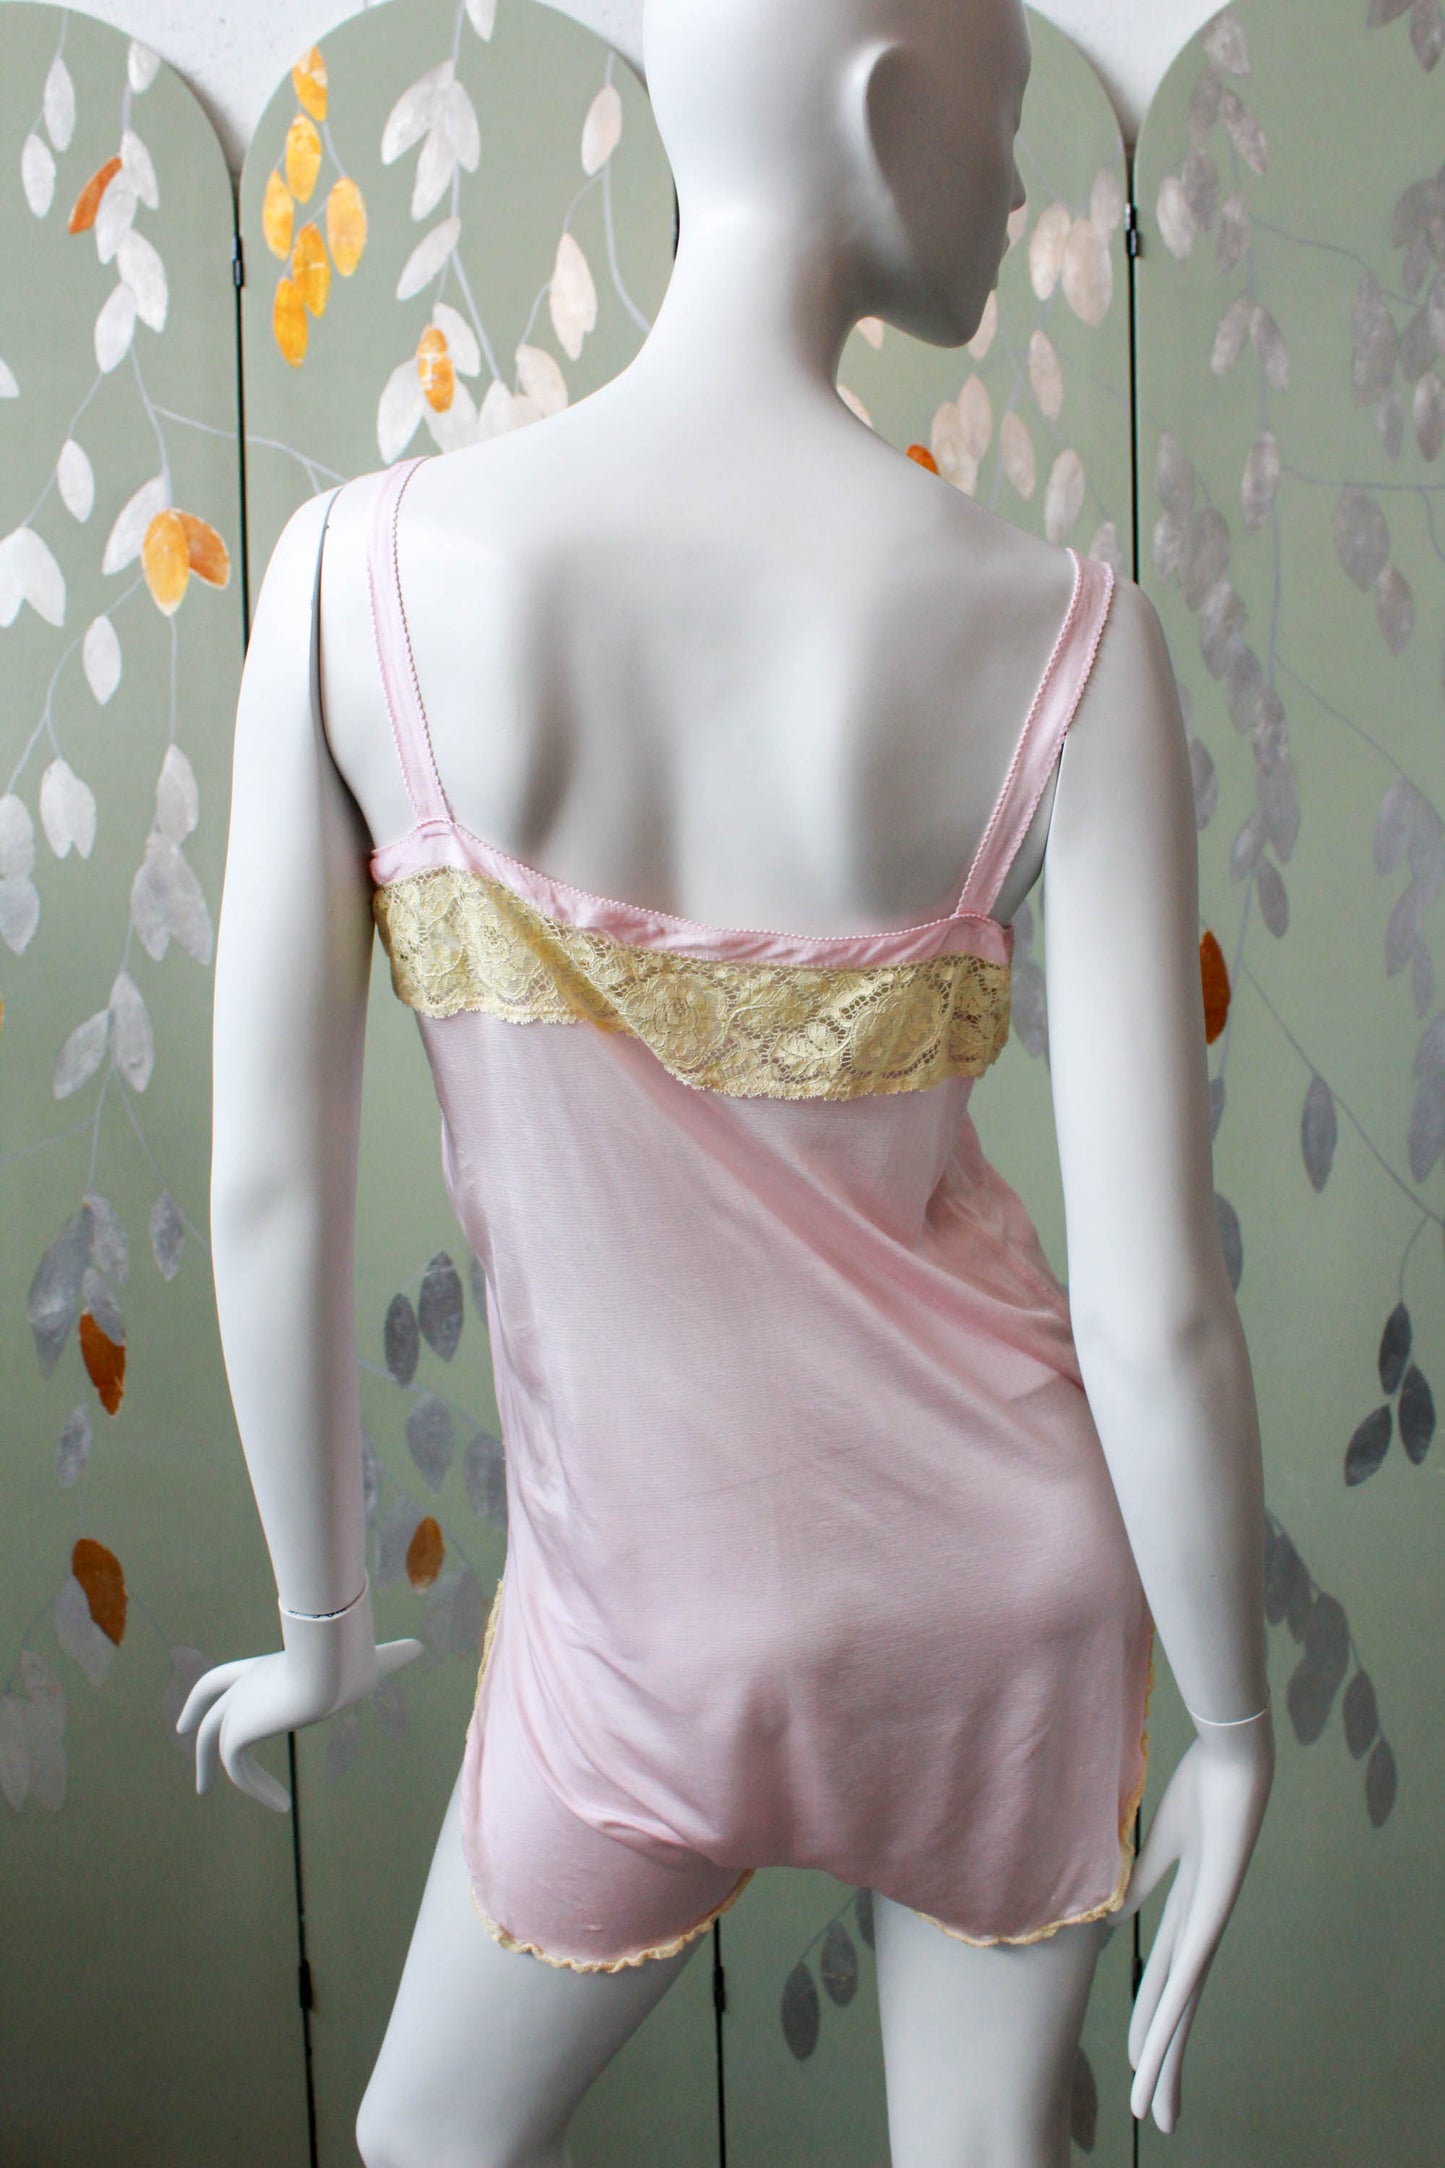 1920s lilac pink rayon step in with lace band, antique teddy, pintucks on front flower applique, side slit up legs